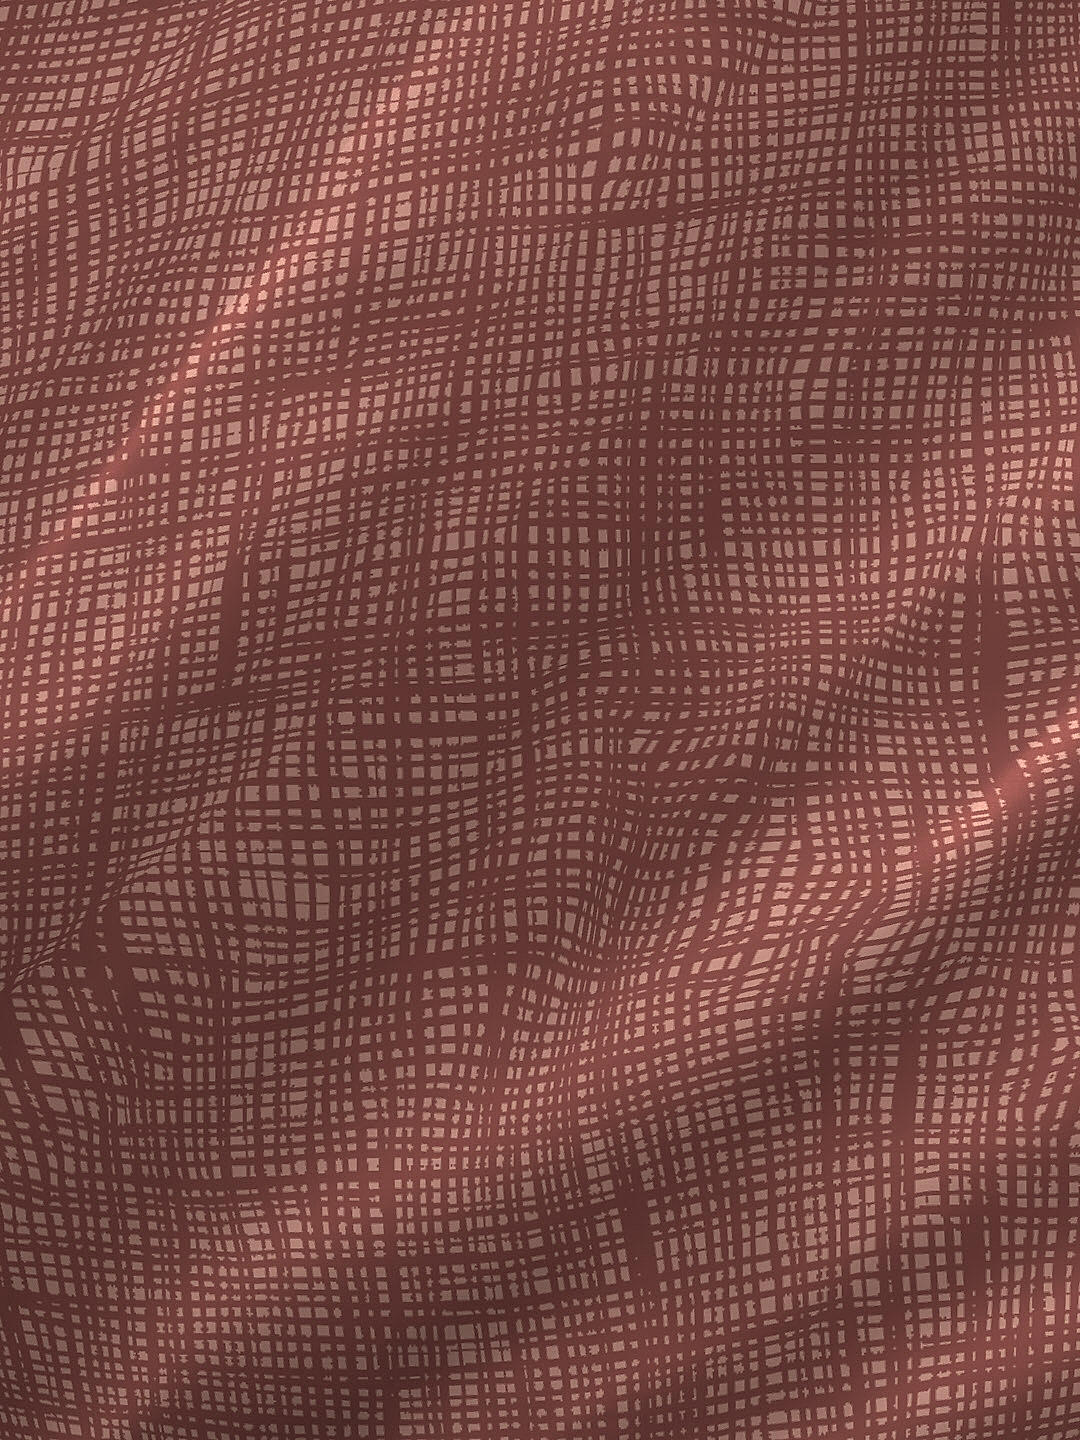 Guaze Cotton Fine Maroon Colored Checkered Print King Bed Sheet Set